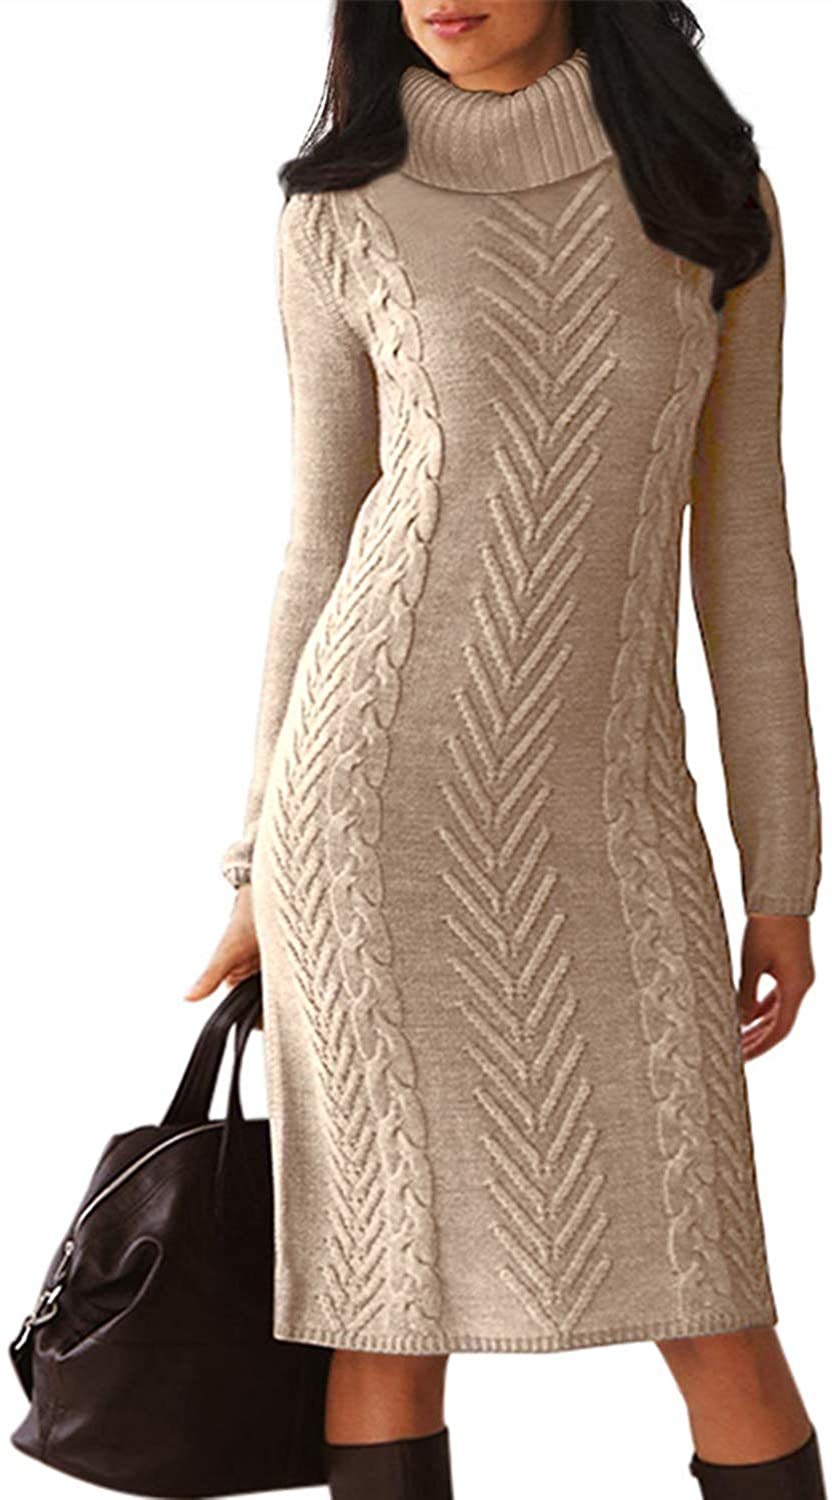 BLENCOT Turtleneck Long Sleeve Chunky Cable Knit Sweater Dress - The 13 Best Sweater Dresses on Amazon